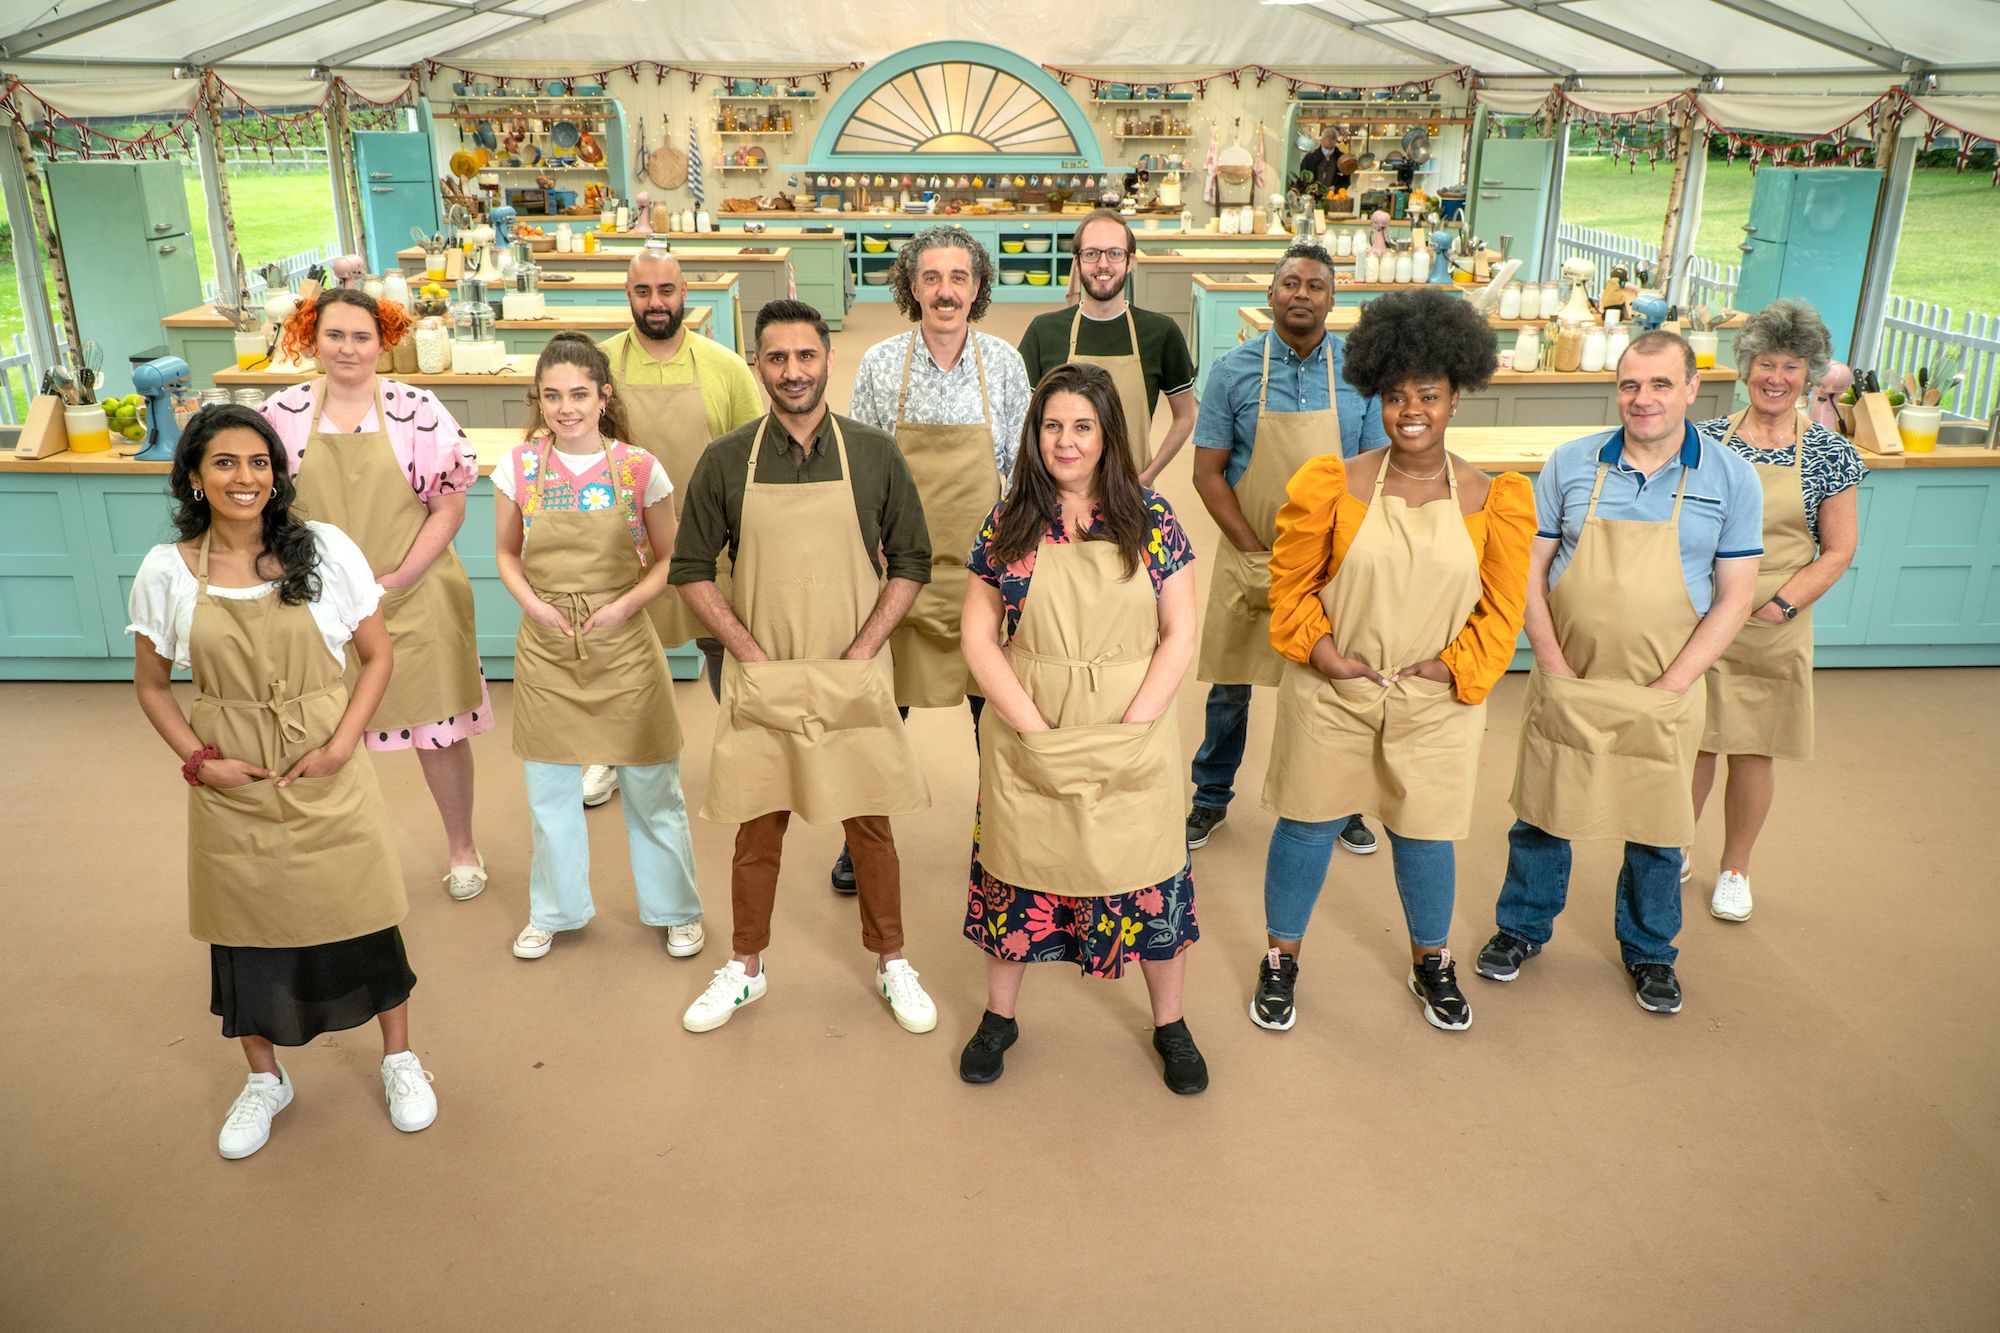 The Great British Bake Off Season 4: Release Date